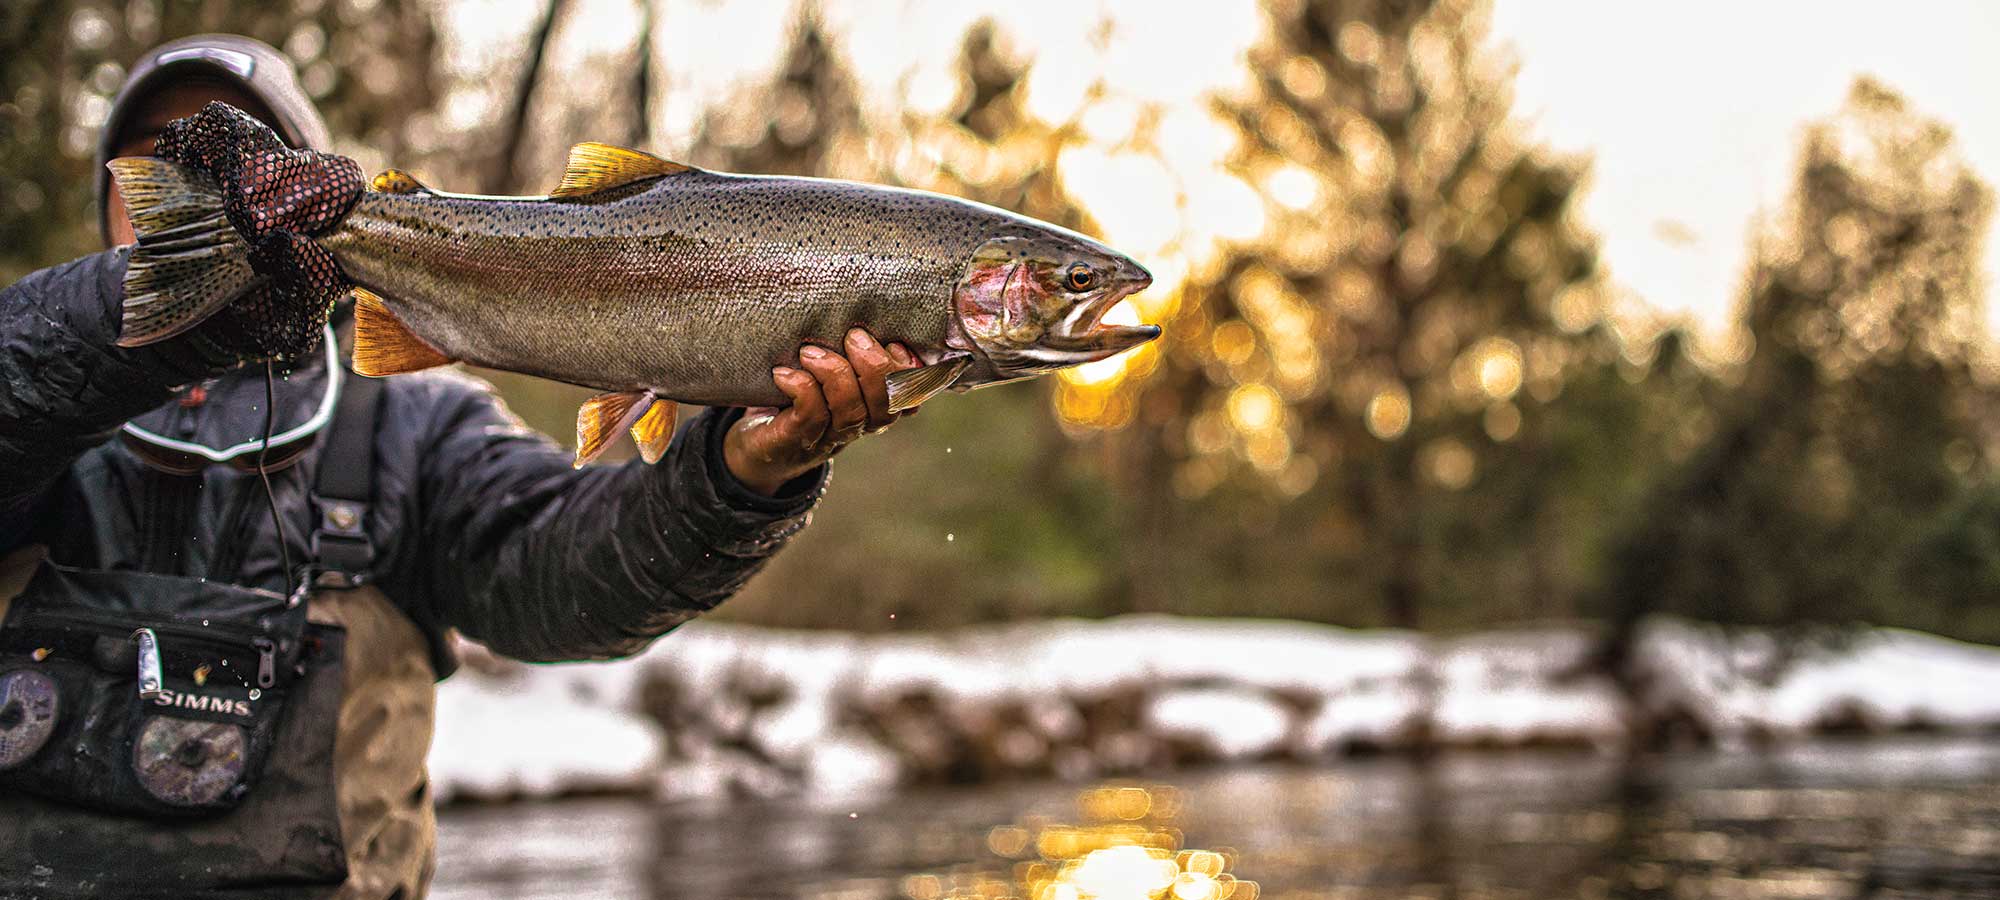 Nothing says spring like casting for steelhead